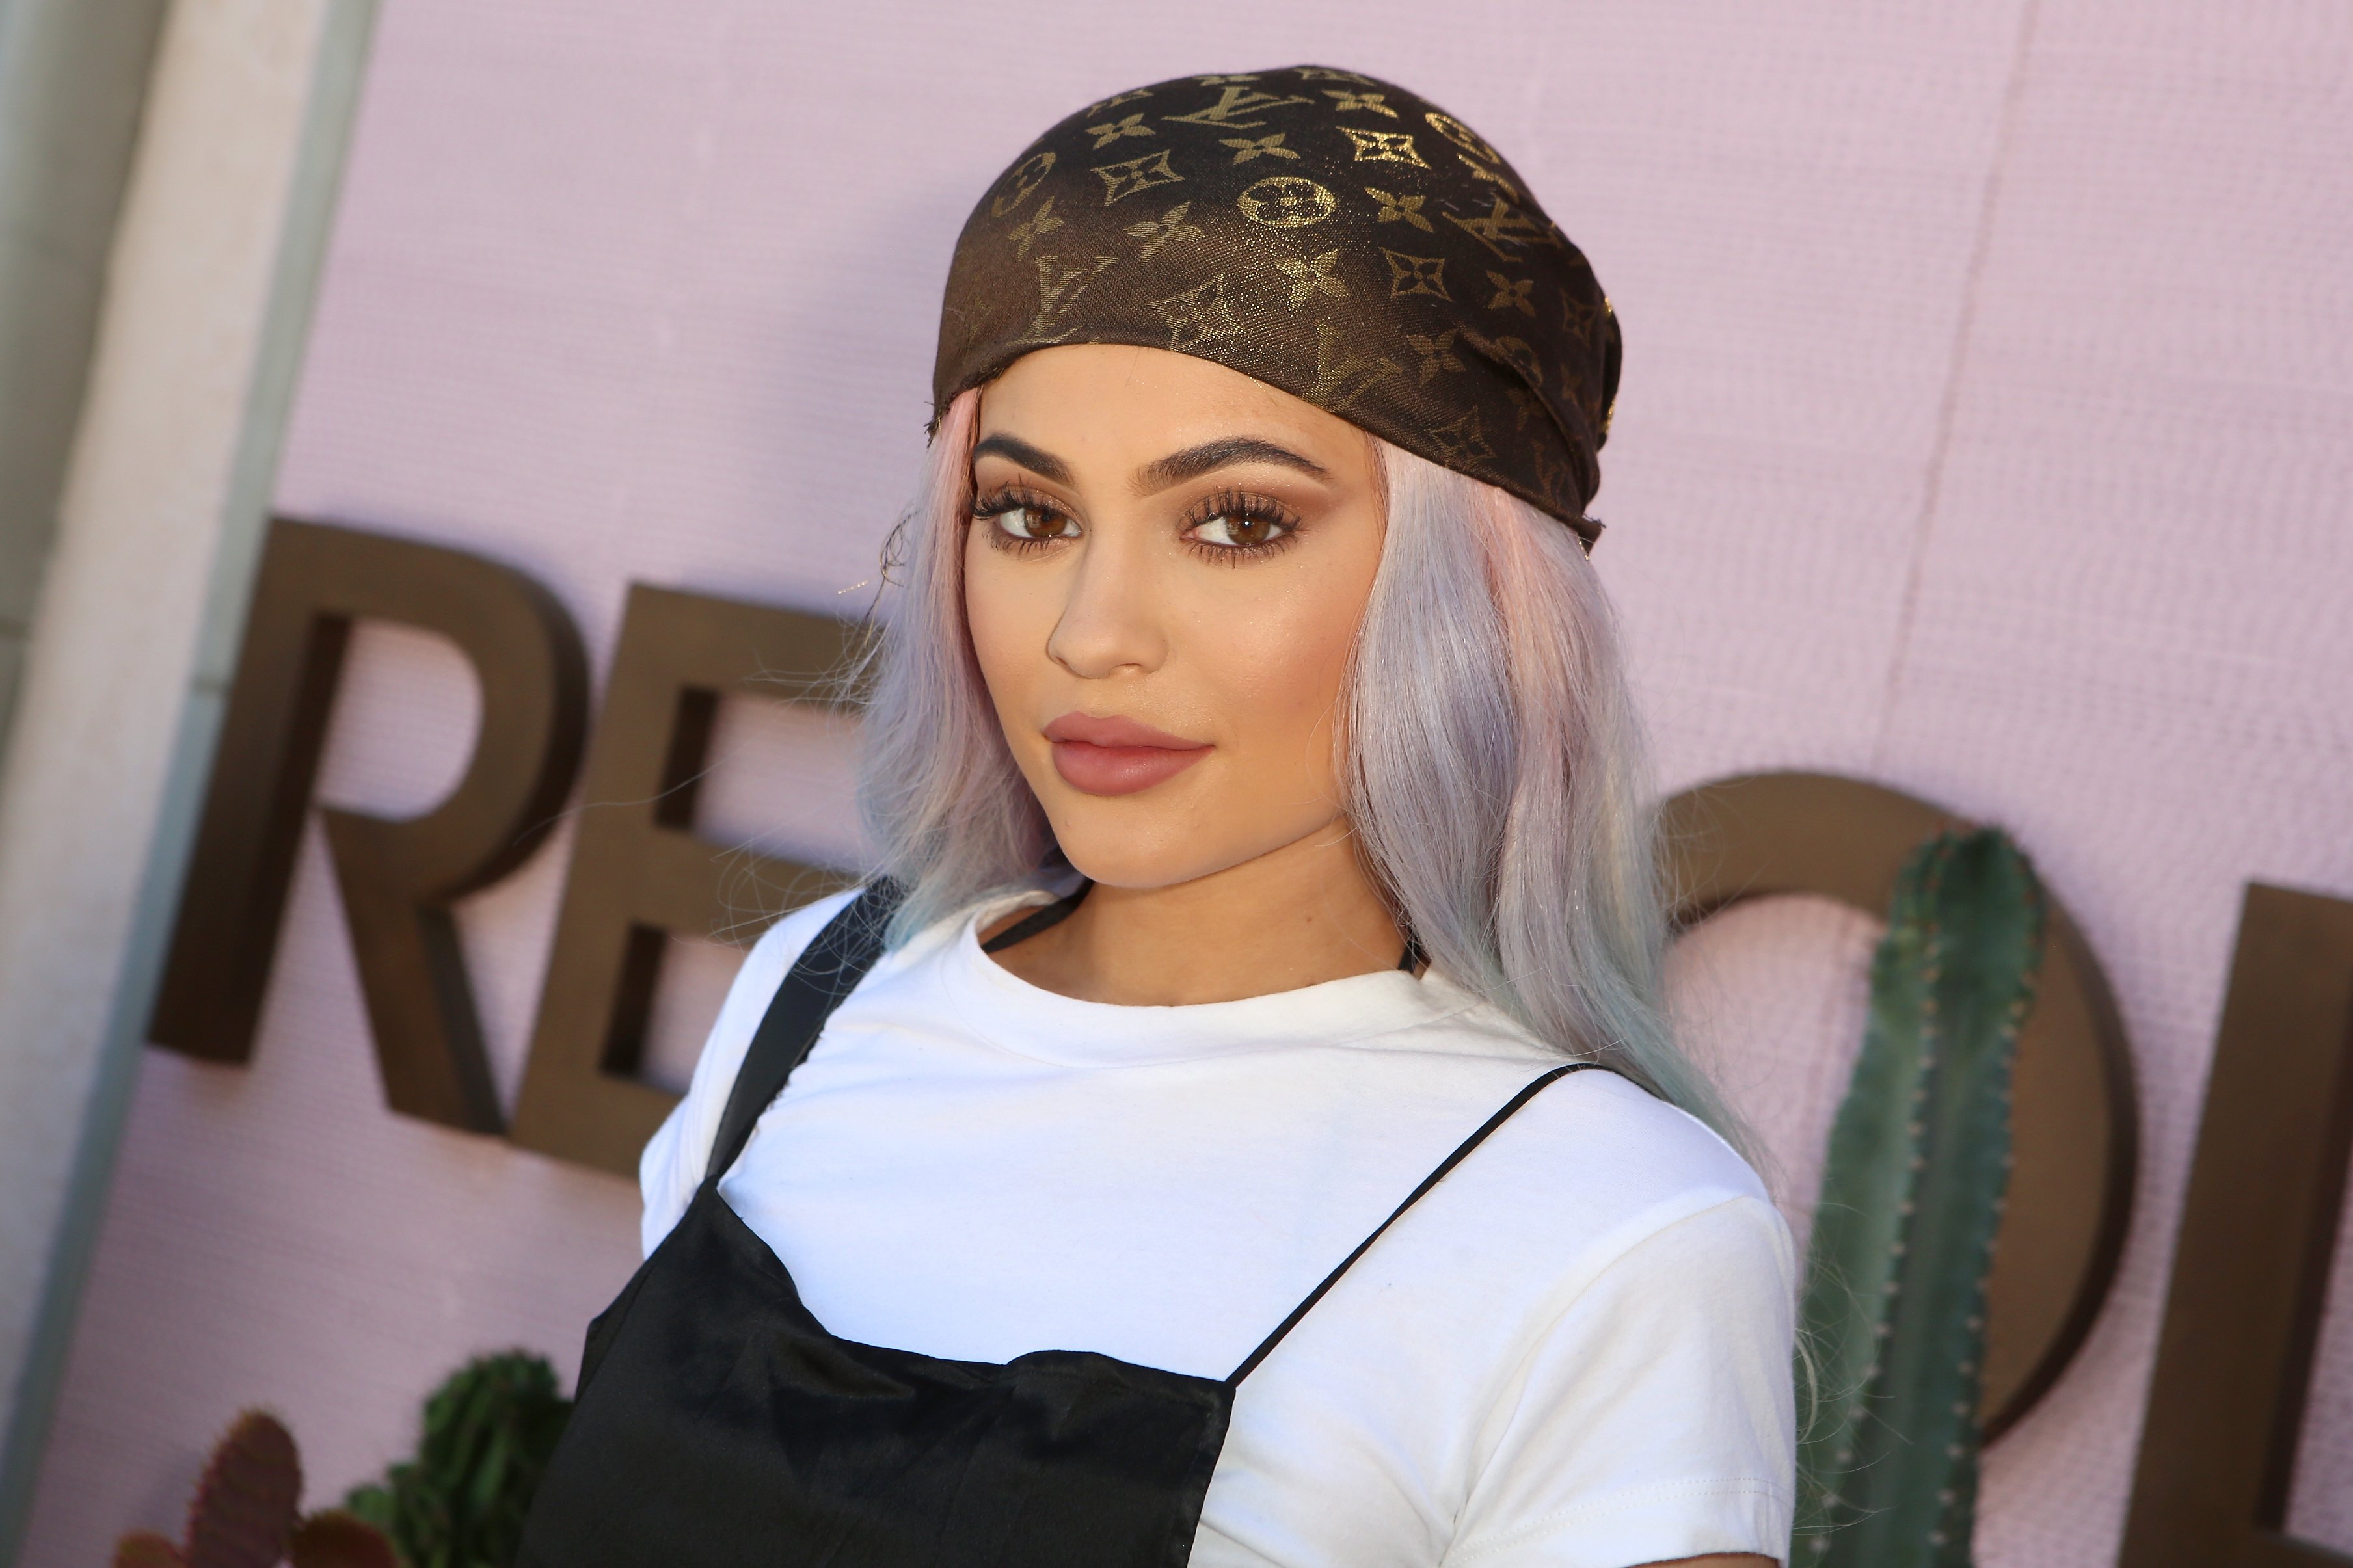  Kylie Jenner at the REVOLVE Desert House on April 17, 2016 in Thermal, California. | Source: Getty Images